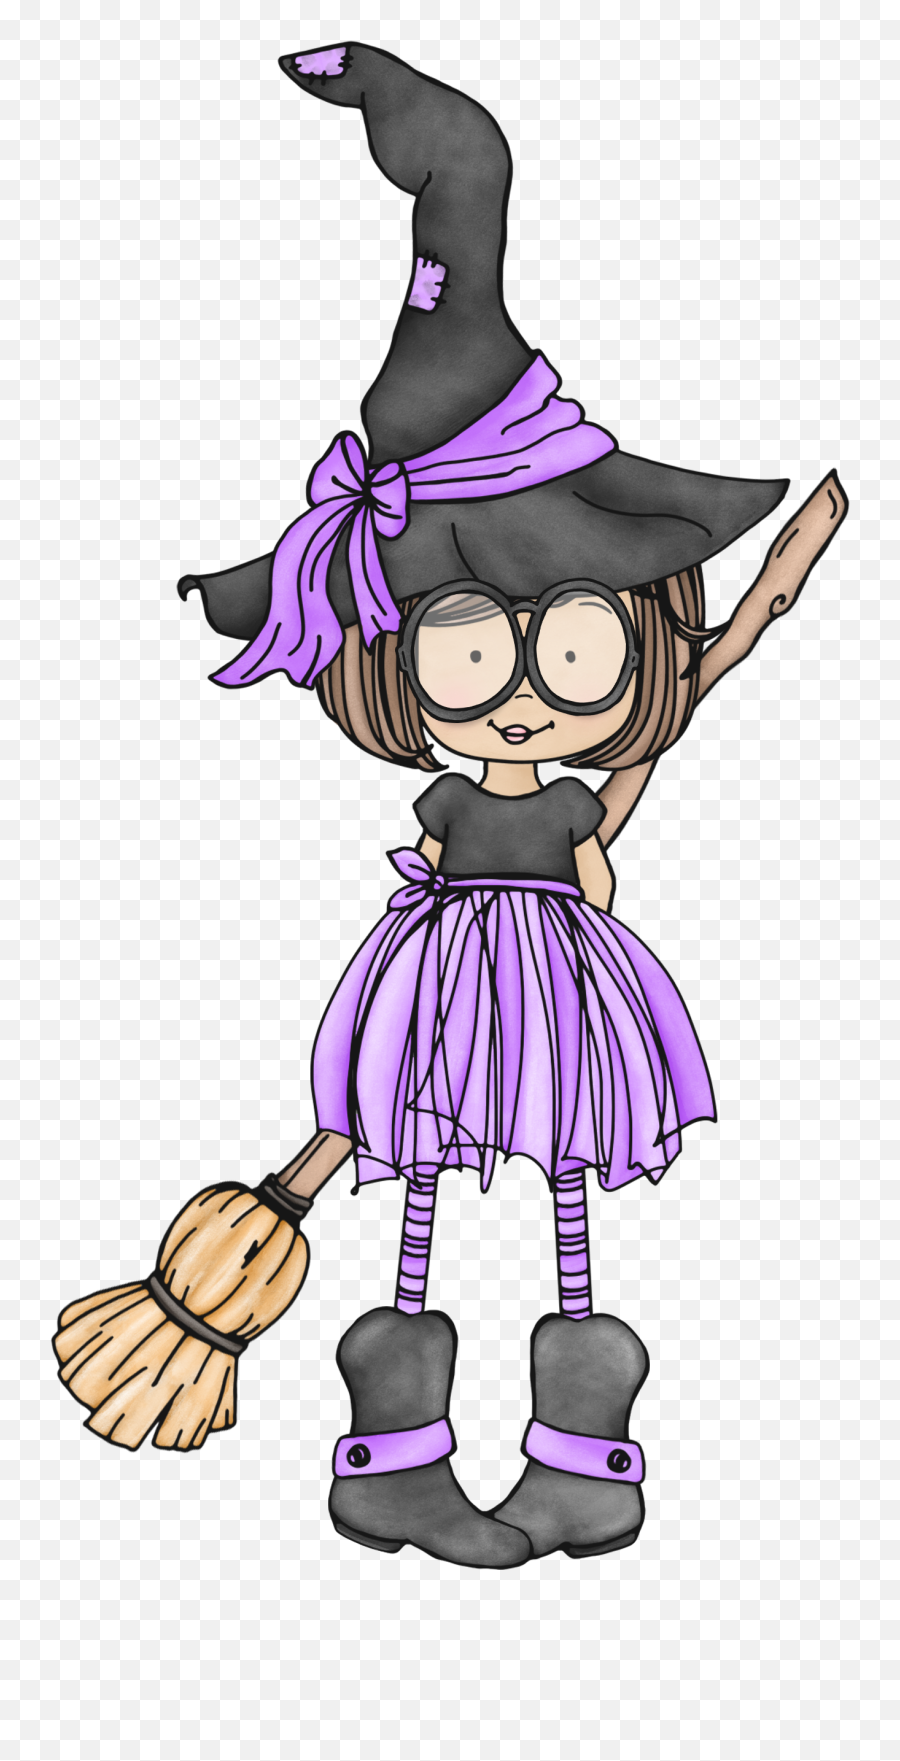 Drawing Witches Witch Hat Transparent U0026 Png Clipart Free - Witch With Glasses Cartoon,Witch Hat Transparent Background